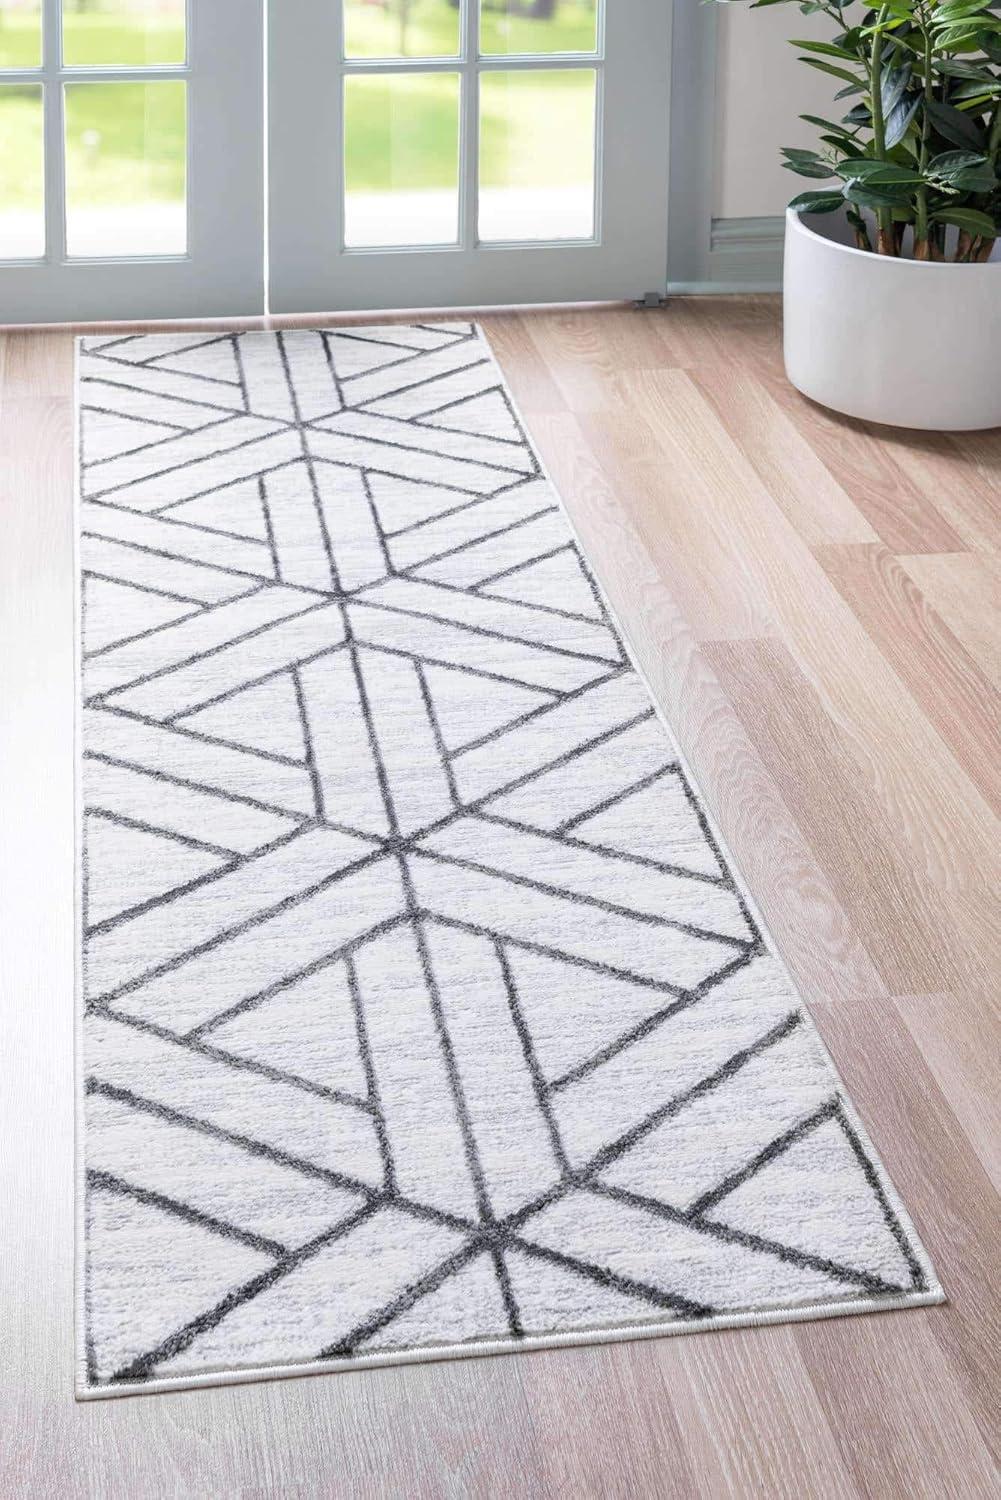 White and Gray Synthetic Trellis Runner Rug, 3' x 10'